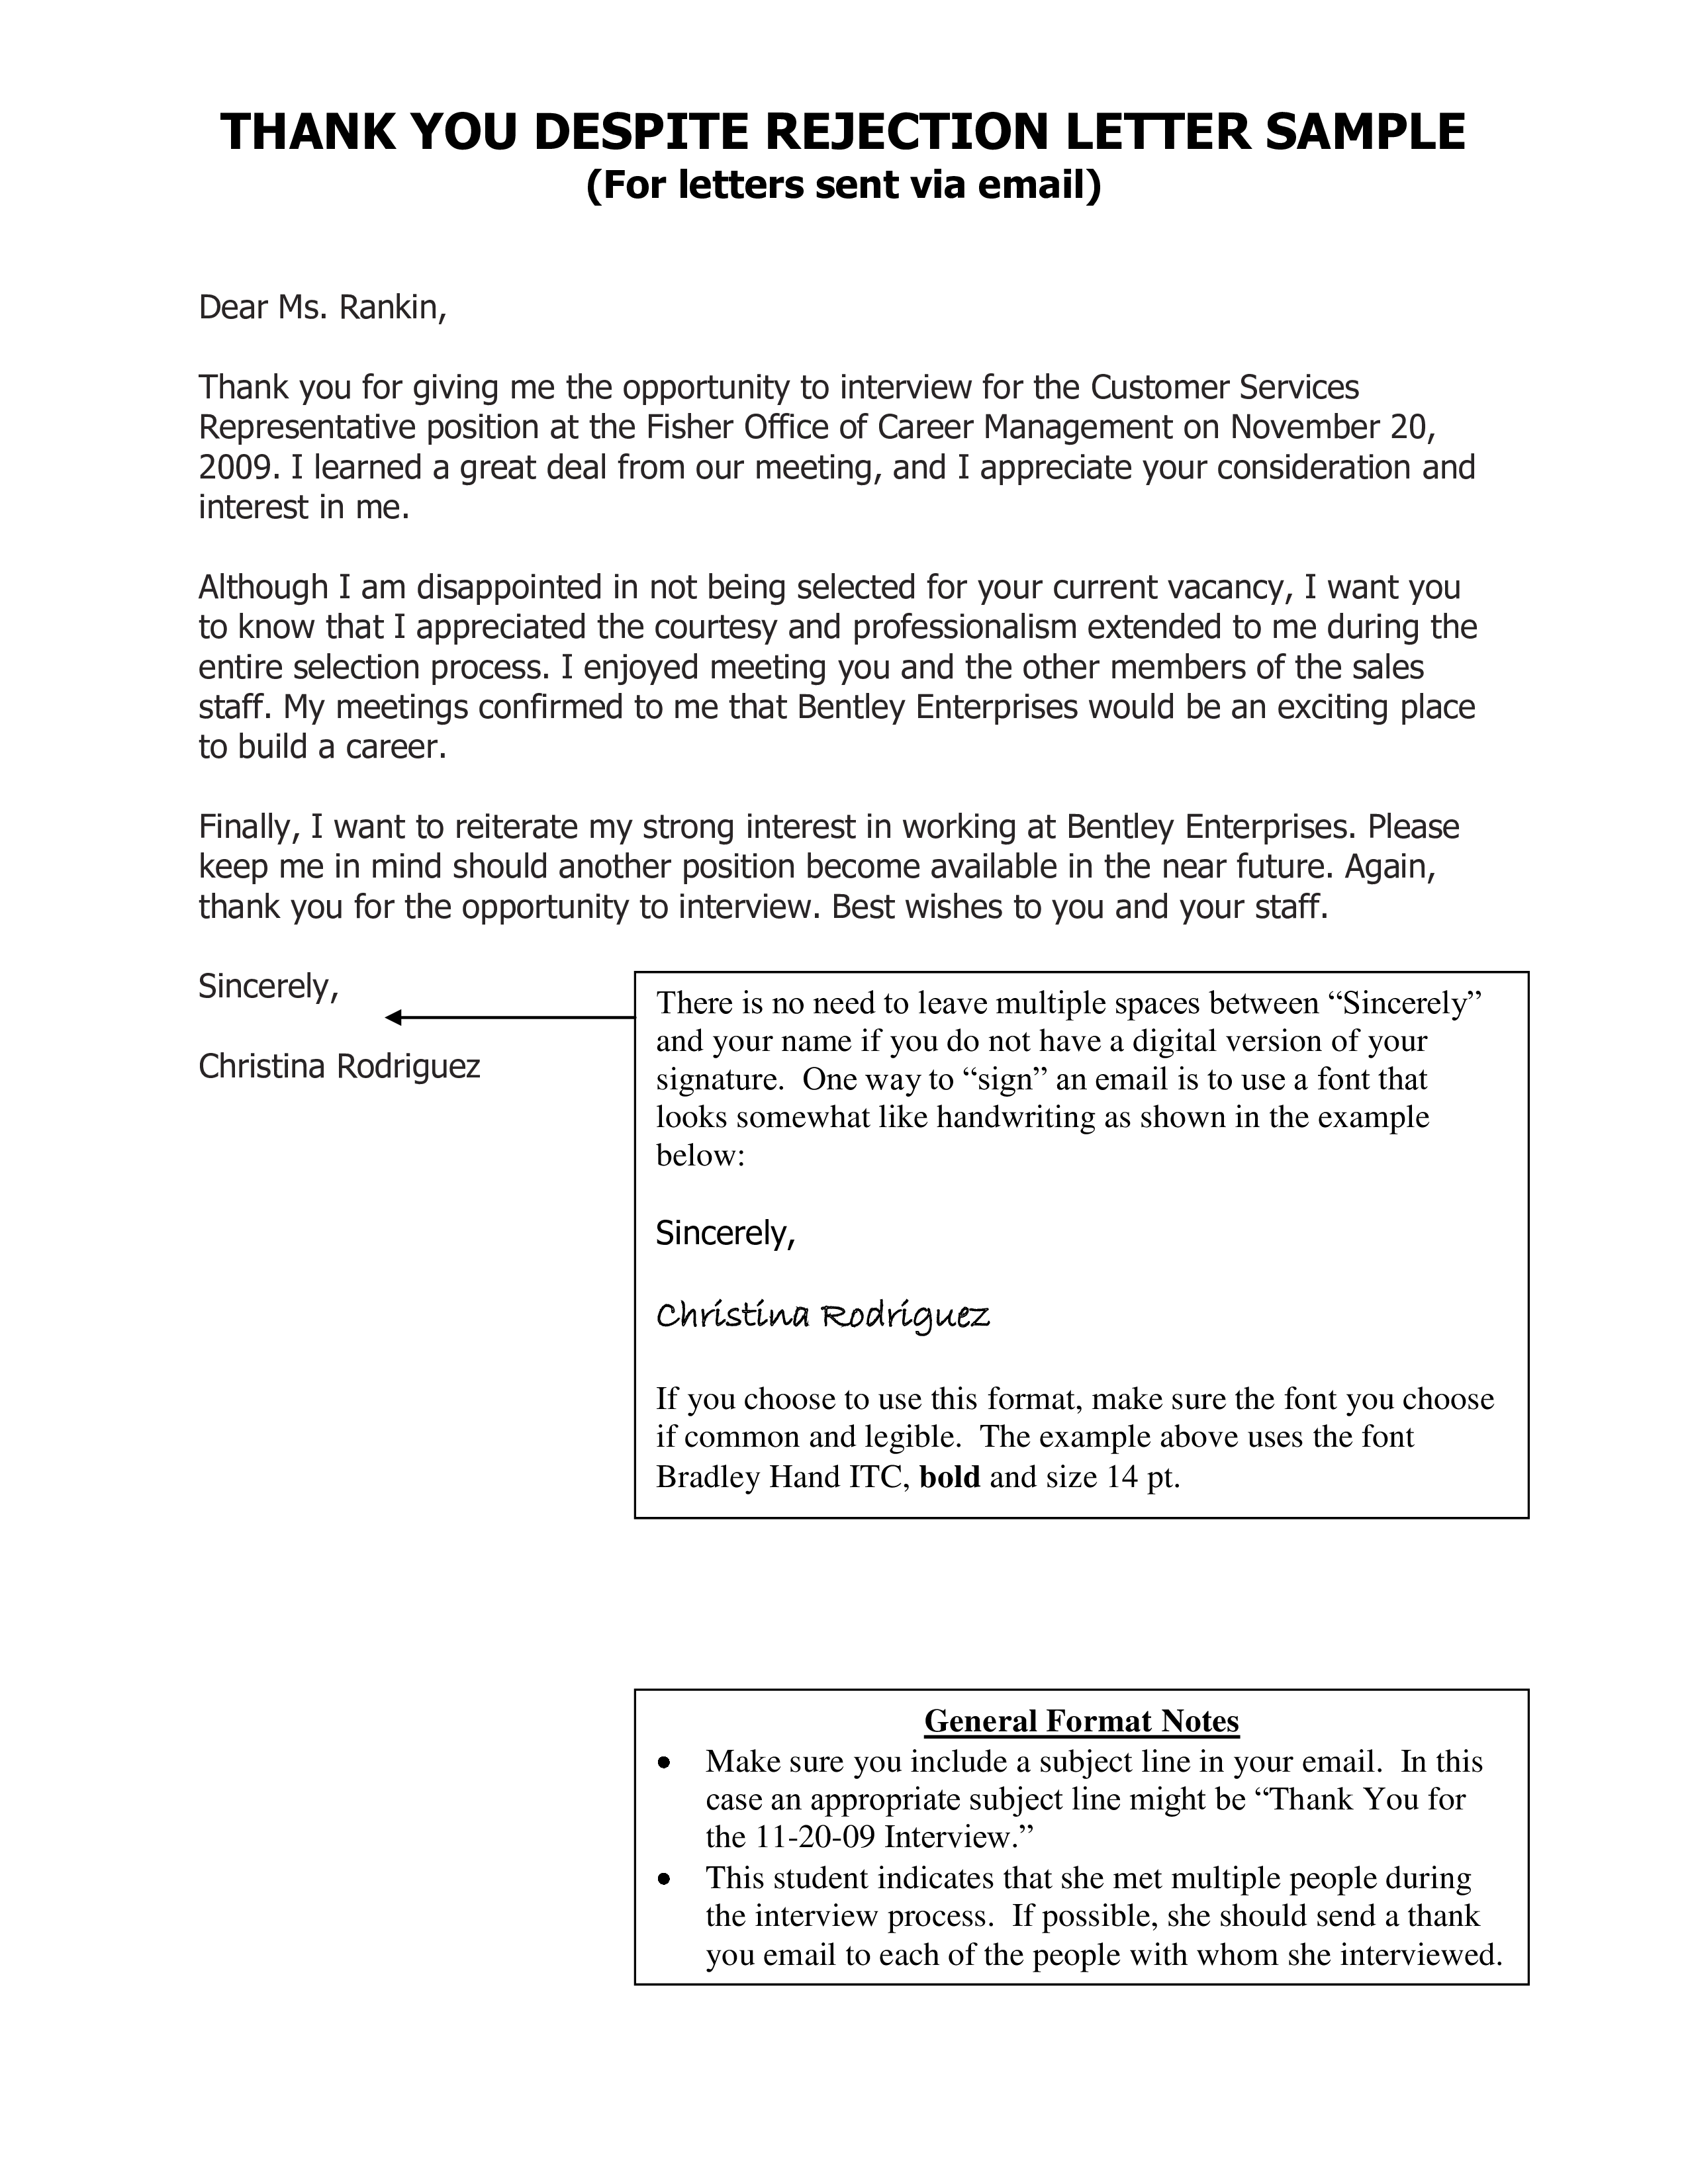 Rejection Response Letter template main image